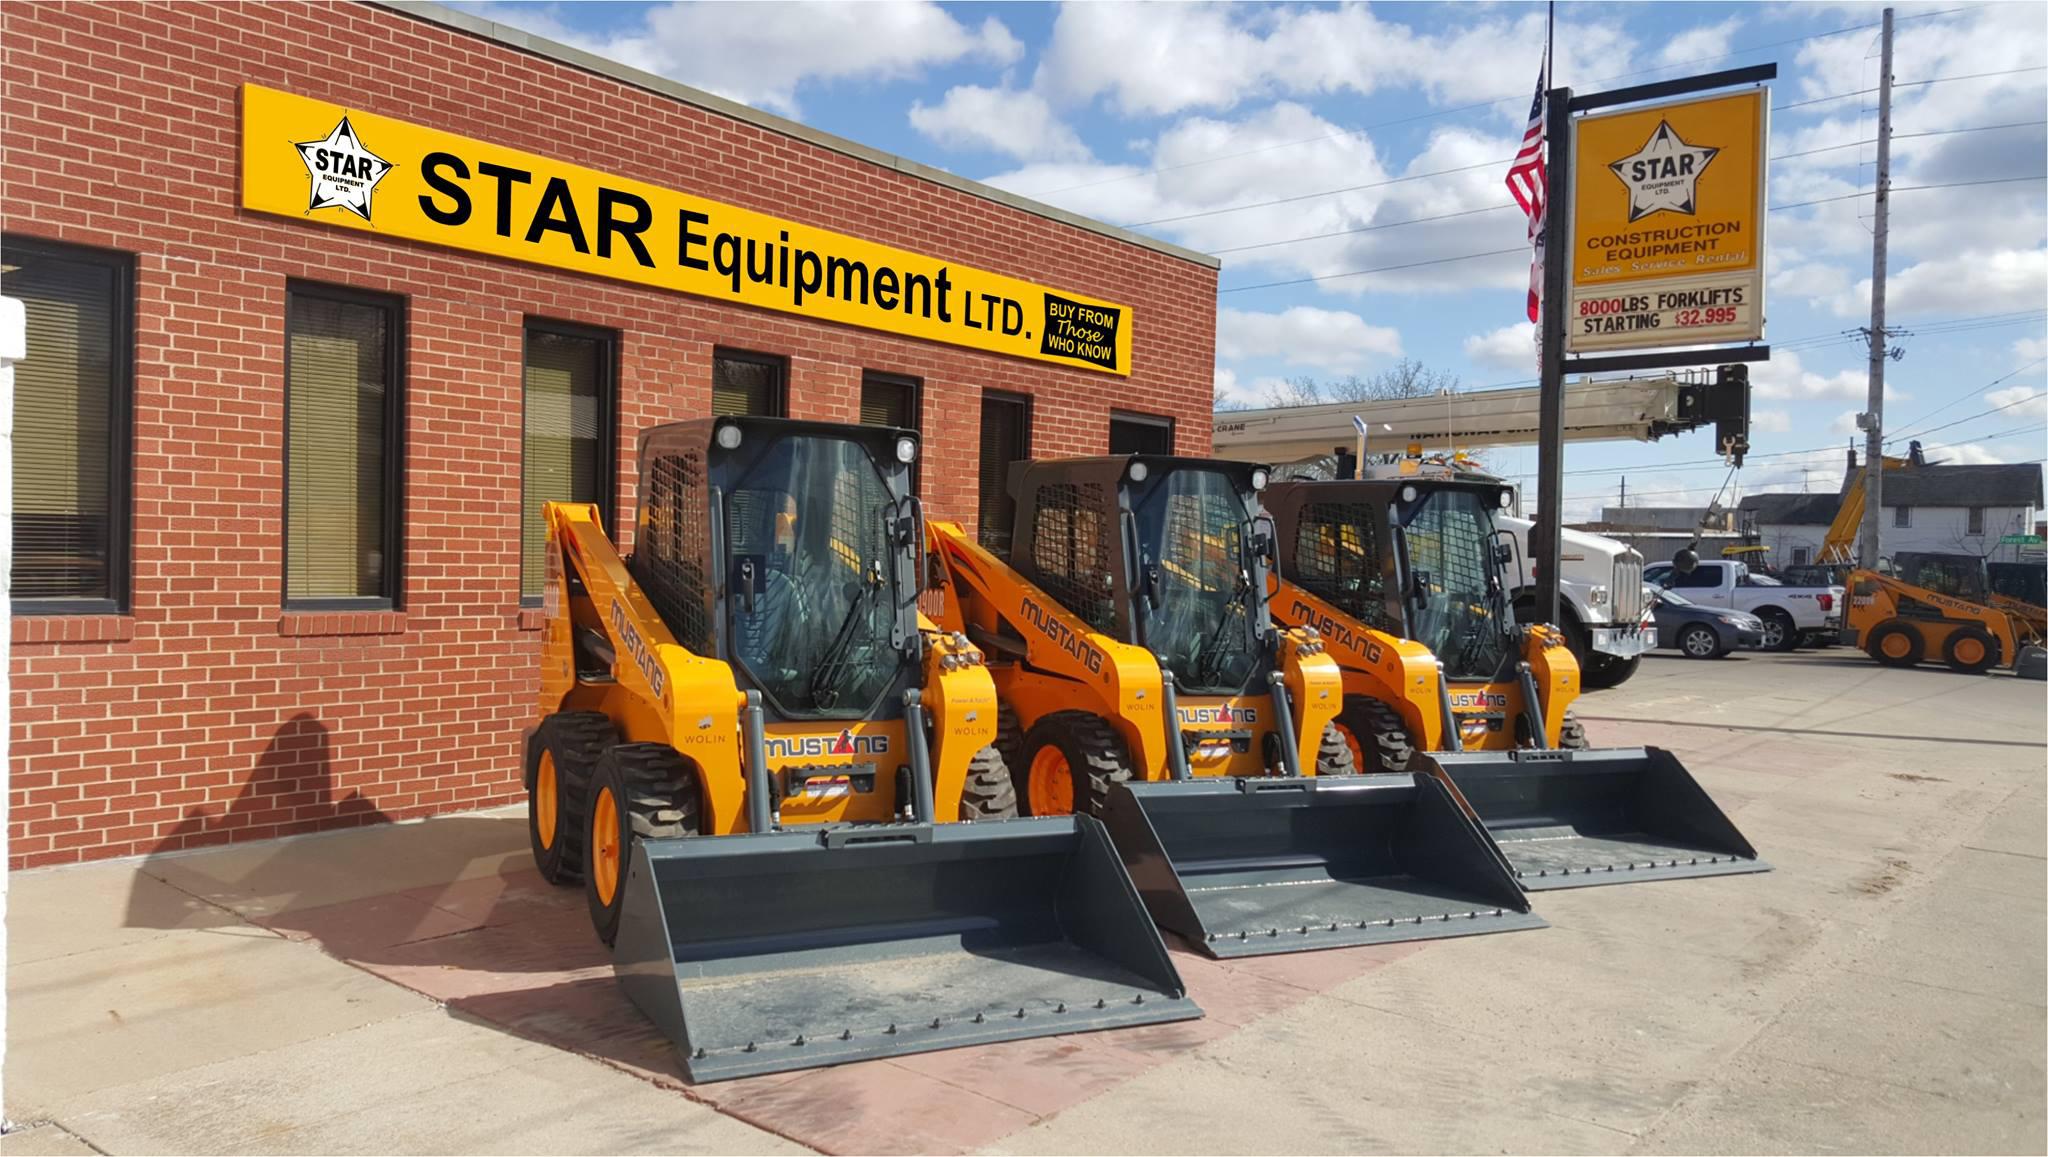 Star Equipment Ltd 1401 2nd Ave Des Moines Ia 50314 Yp Com